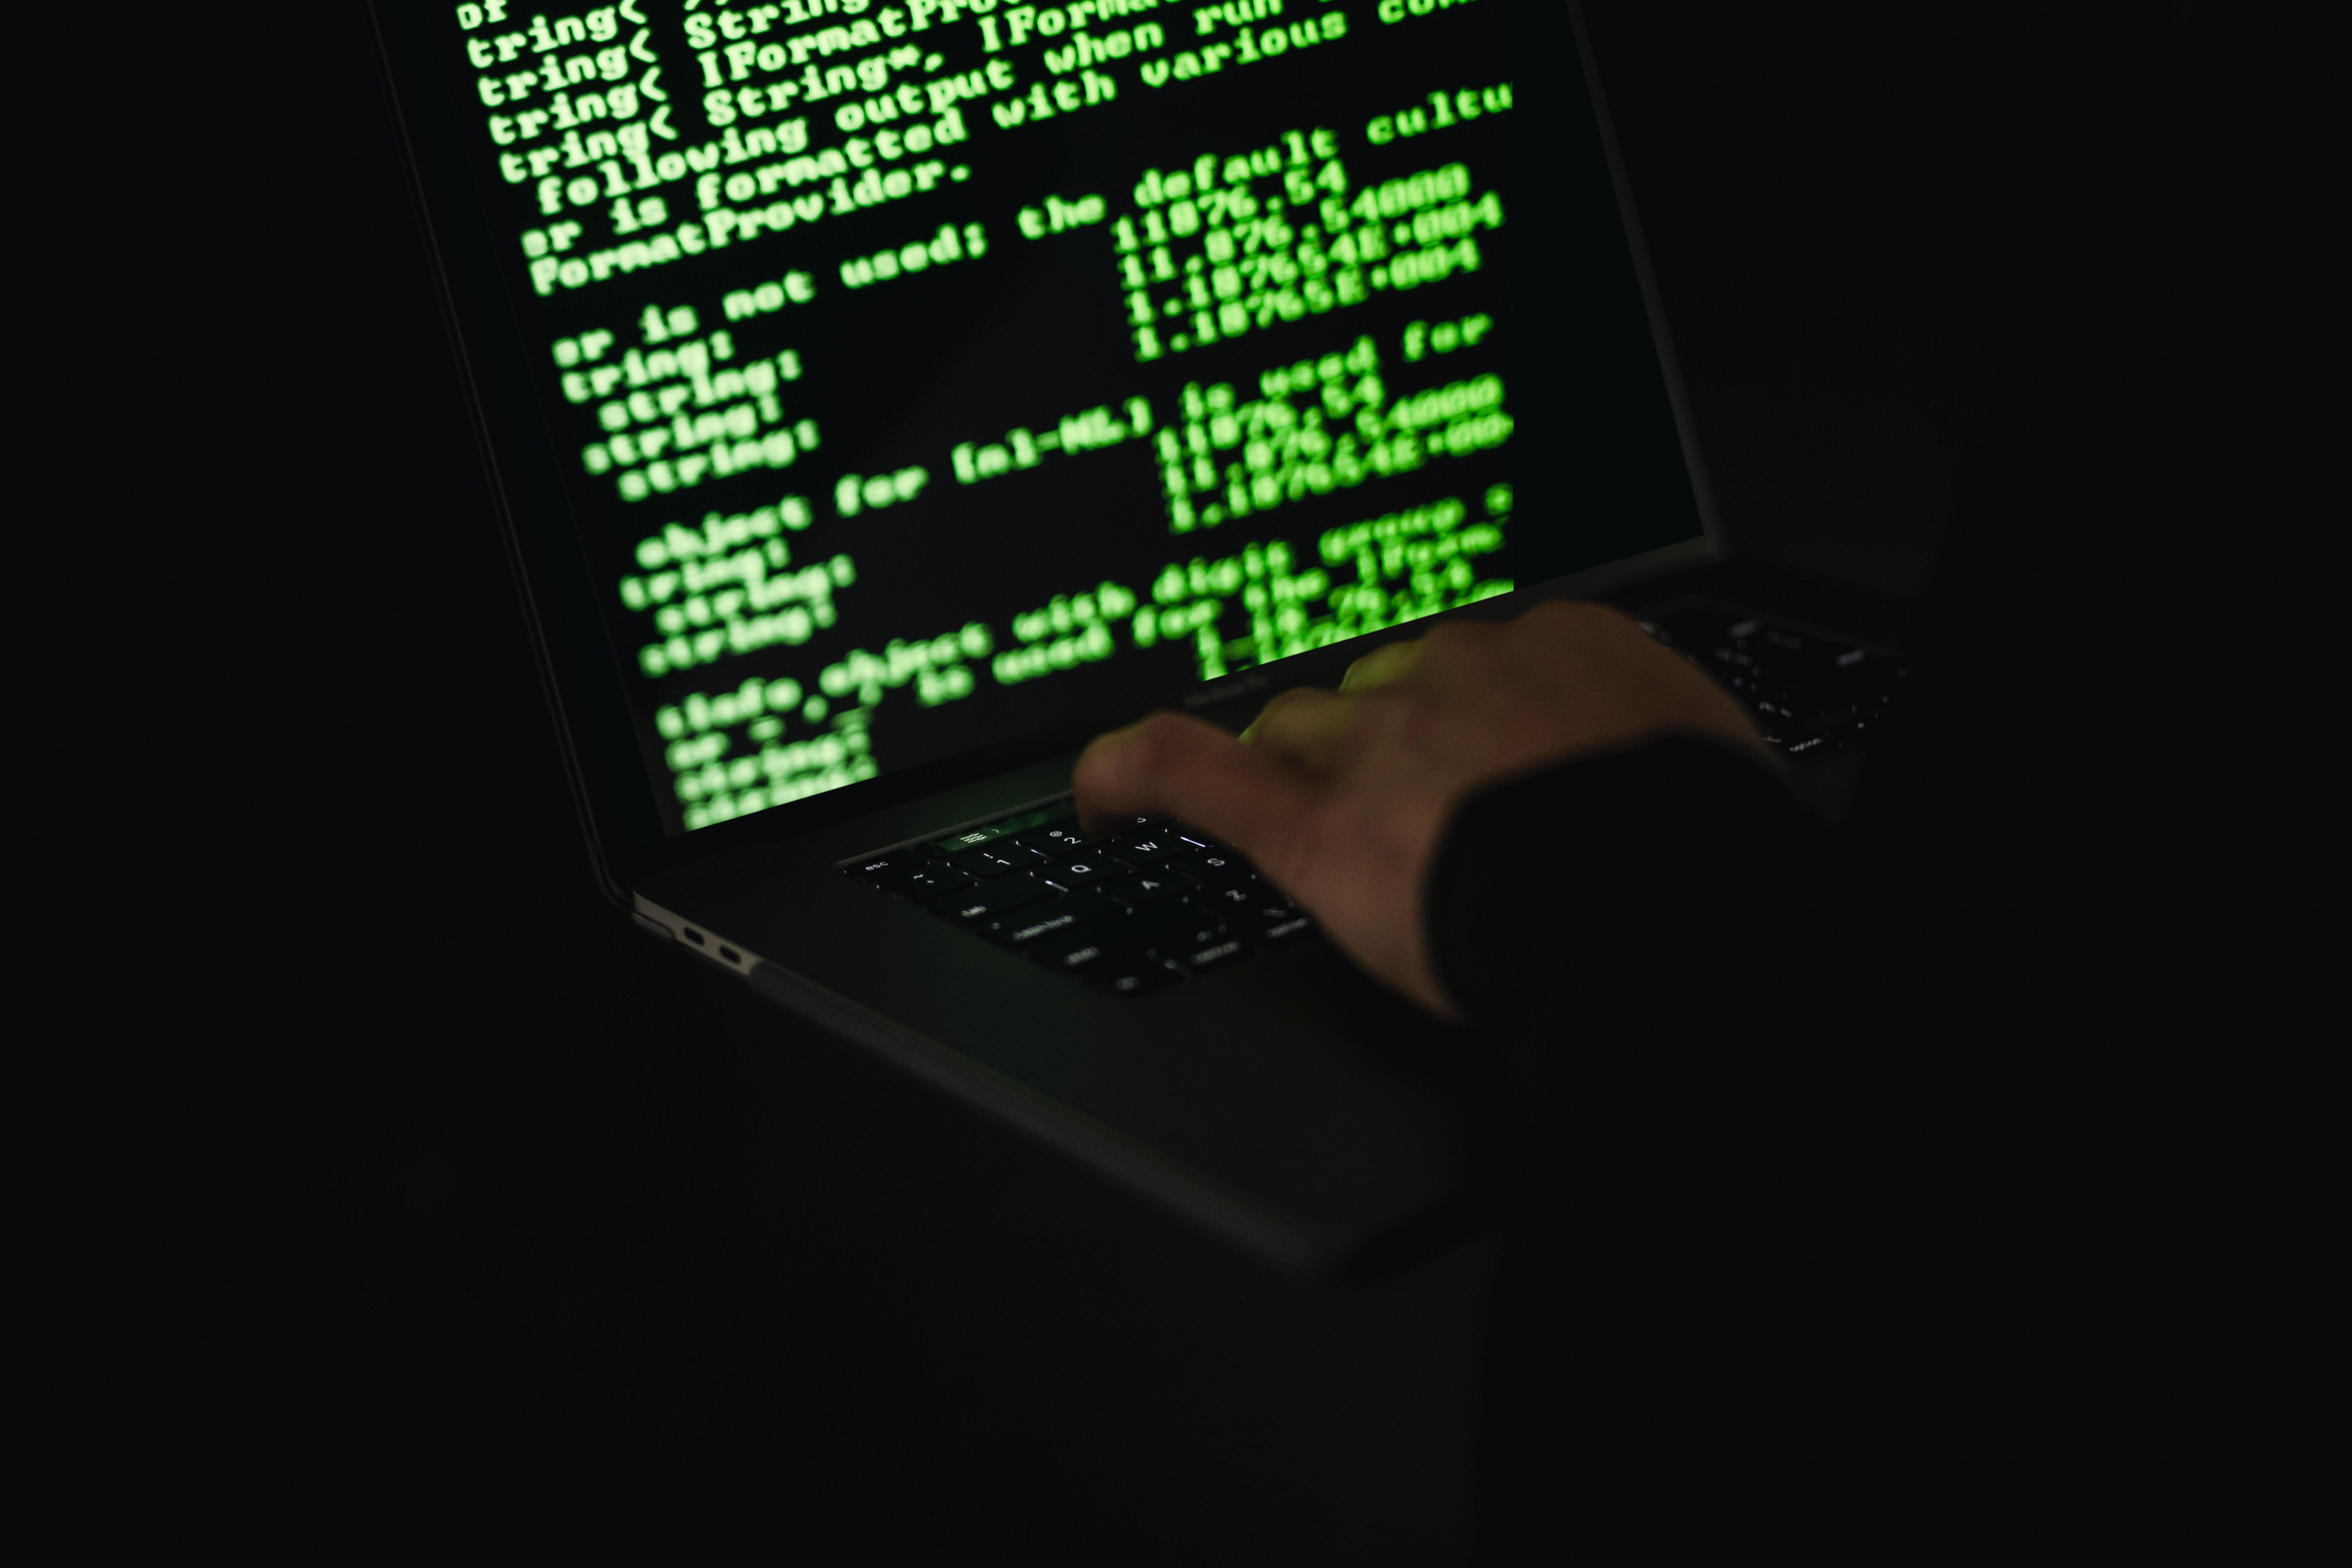 Law Firm Targeted By Hackers: The HWL Ebsworth Attack